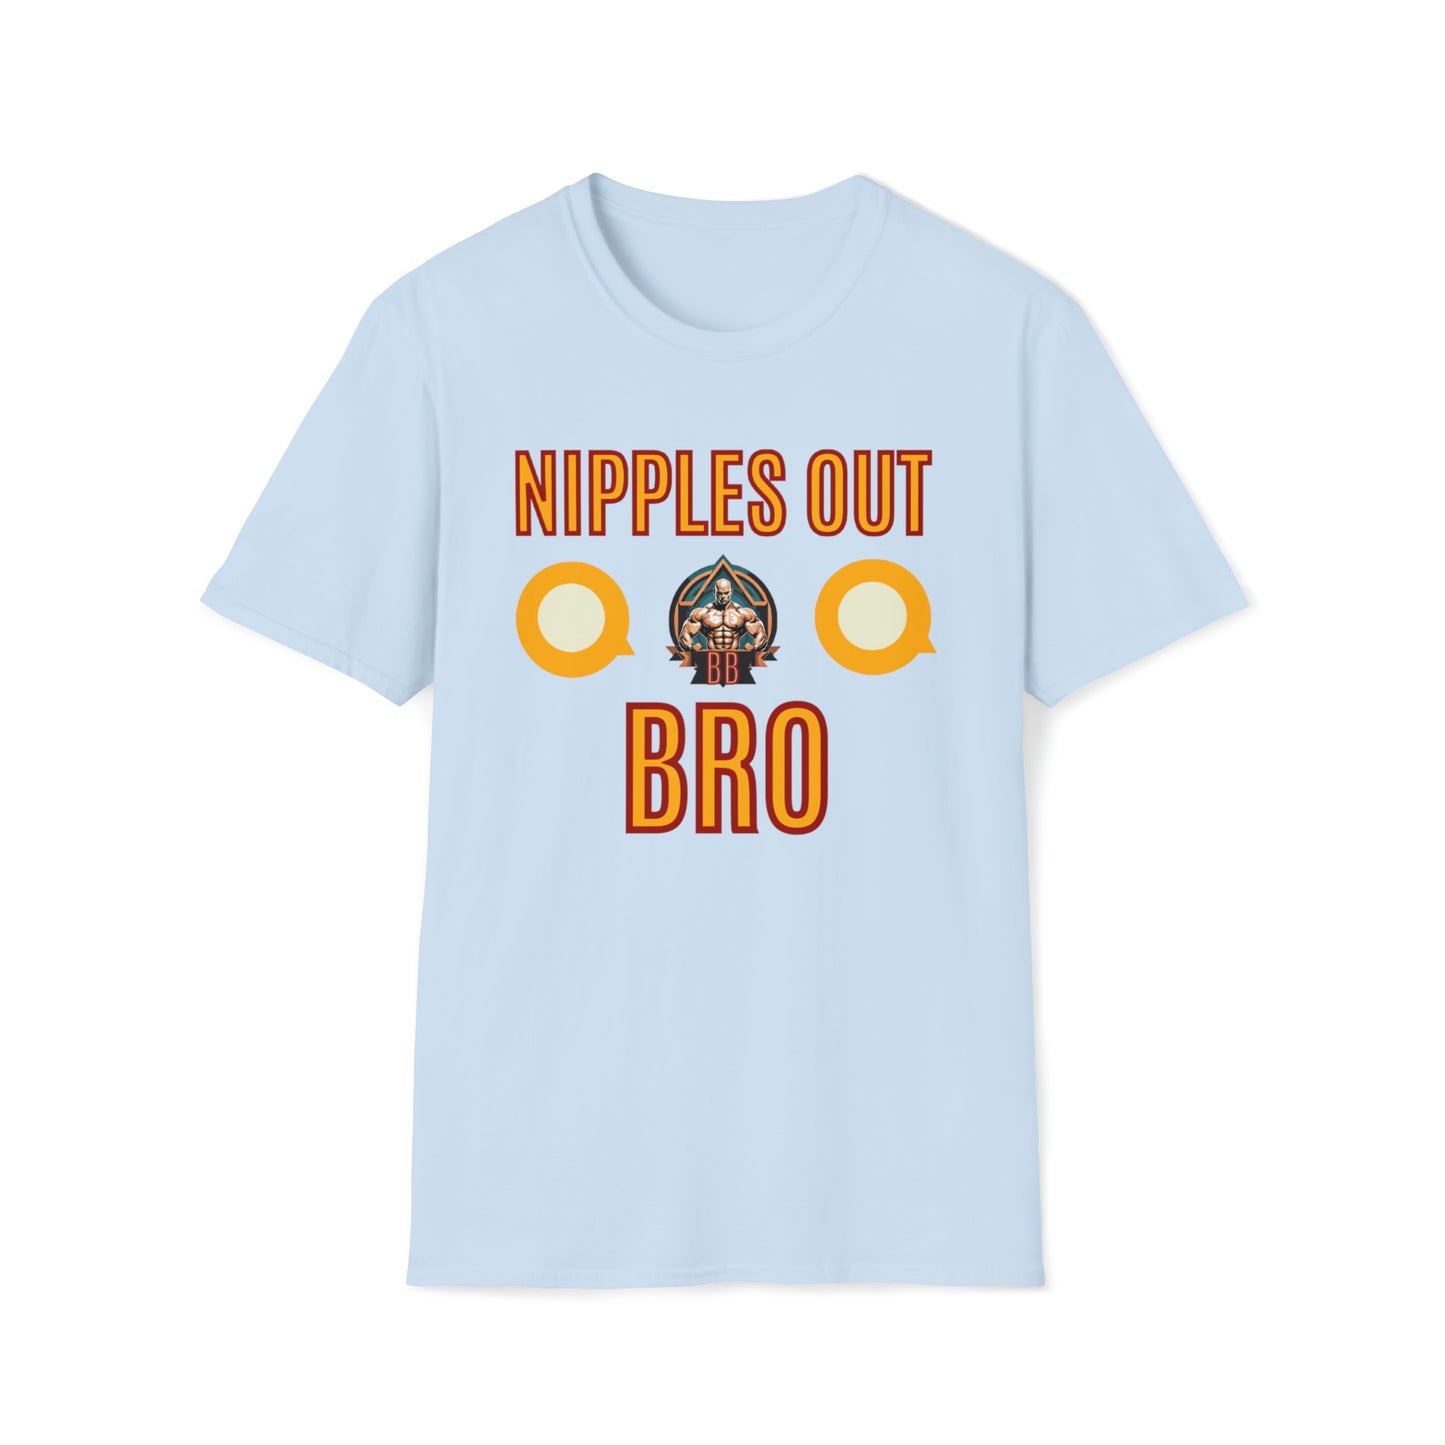 Unisex Nipples Out Bro #2 Softstyle T-Shirt, Humorous Graphic Tee, Gift for Gym Enthusiasts, Trendy Urban Streetwear, Casual Comfortable Top, Fun Graphic T-shirt, Trendy Shirt